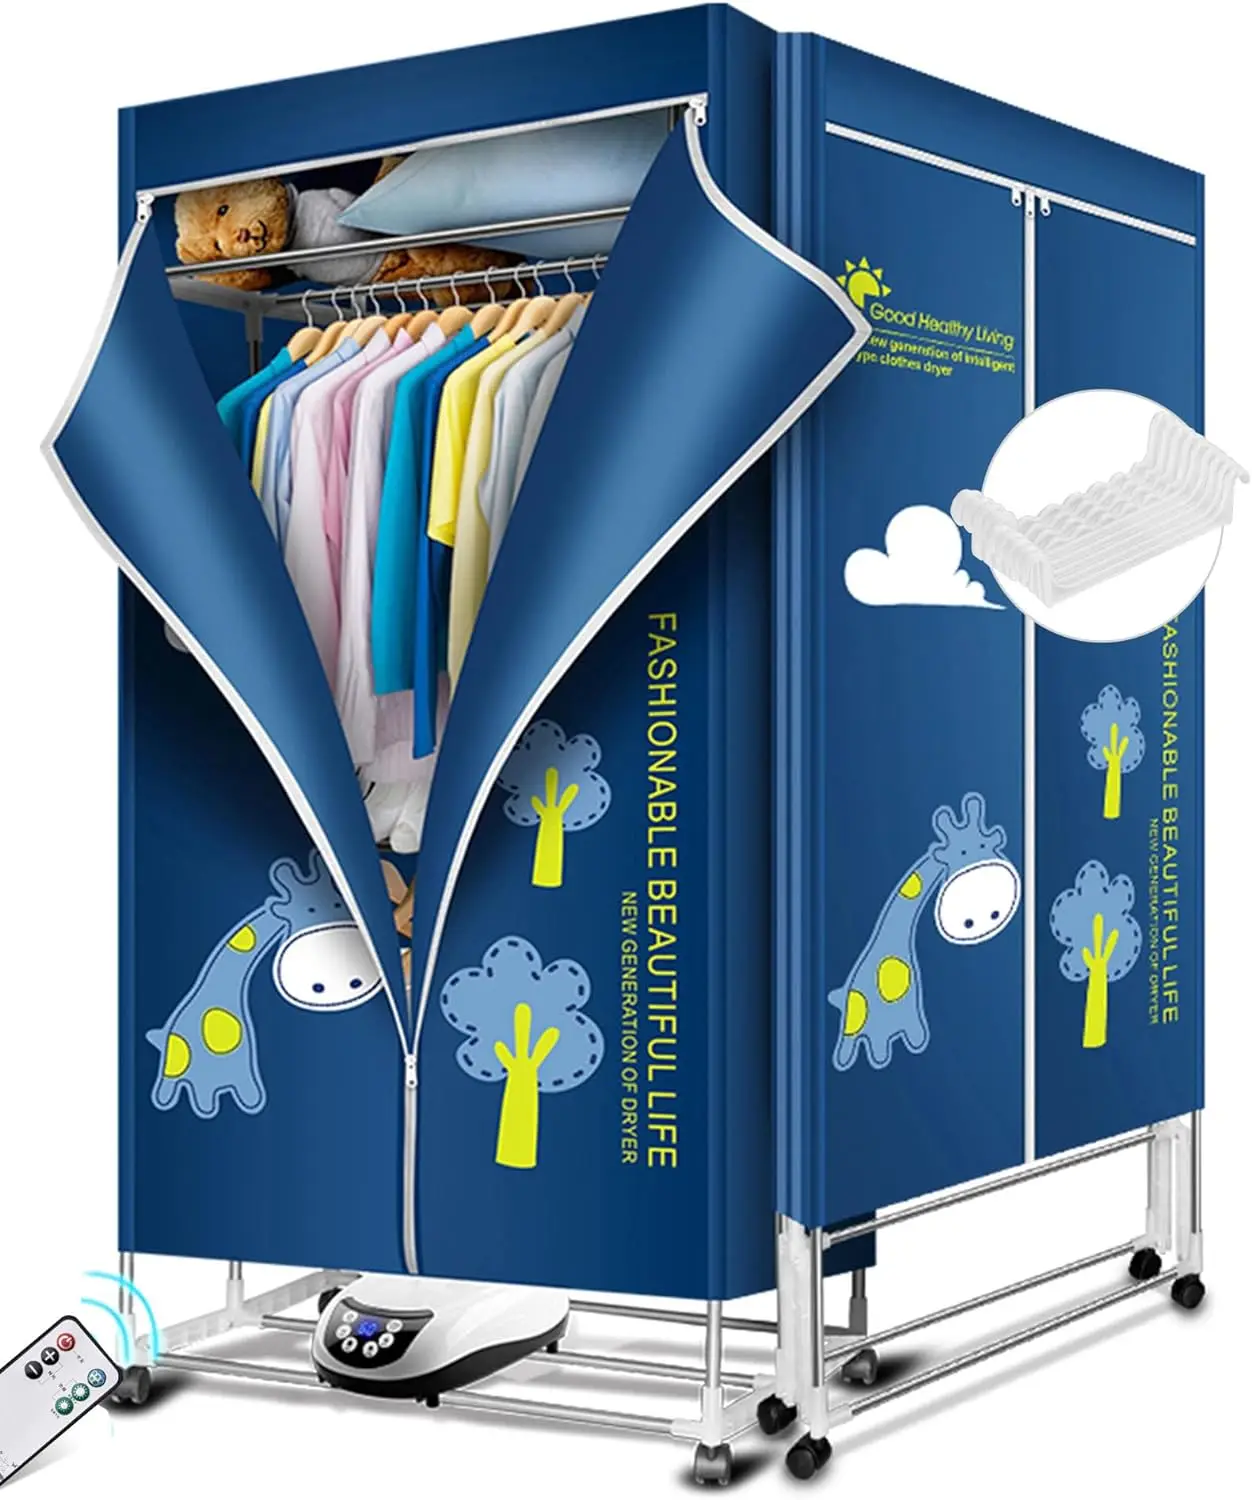 New Portable folding Electric Clothes Dryer Machine with Remote Control 1500W Waterproof Cloth Anion clothes air dryer